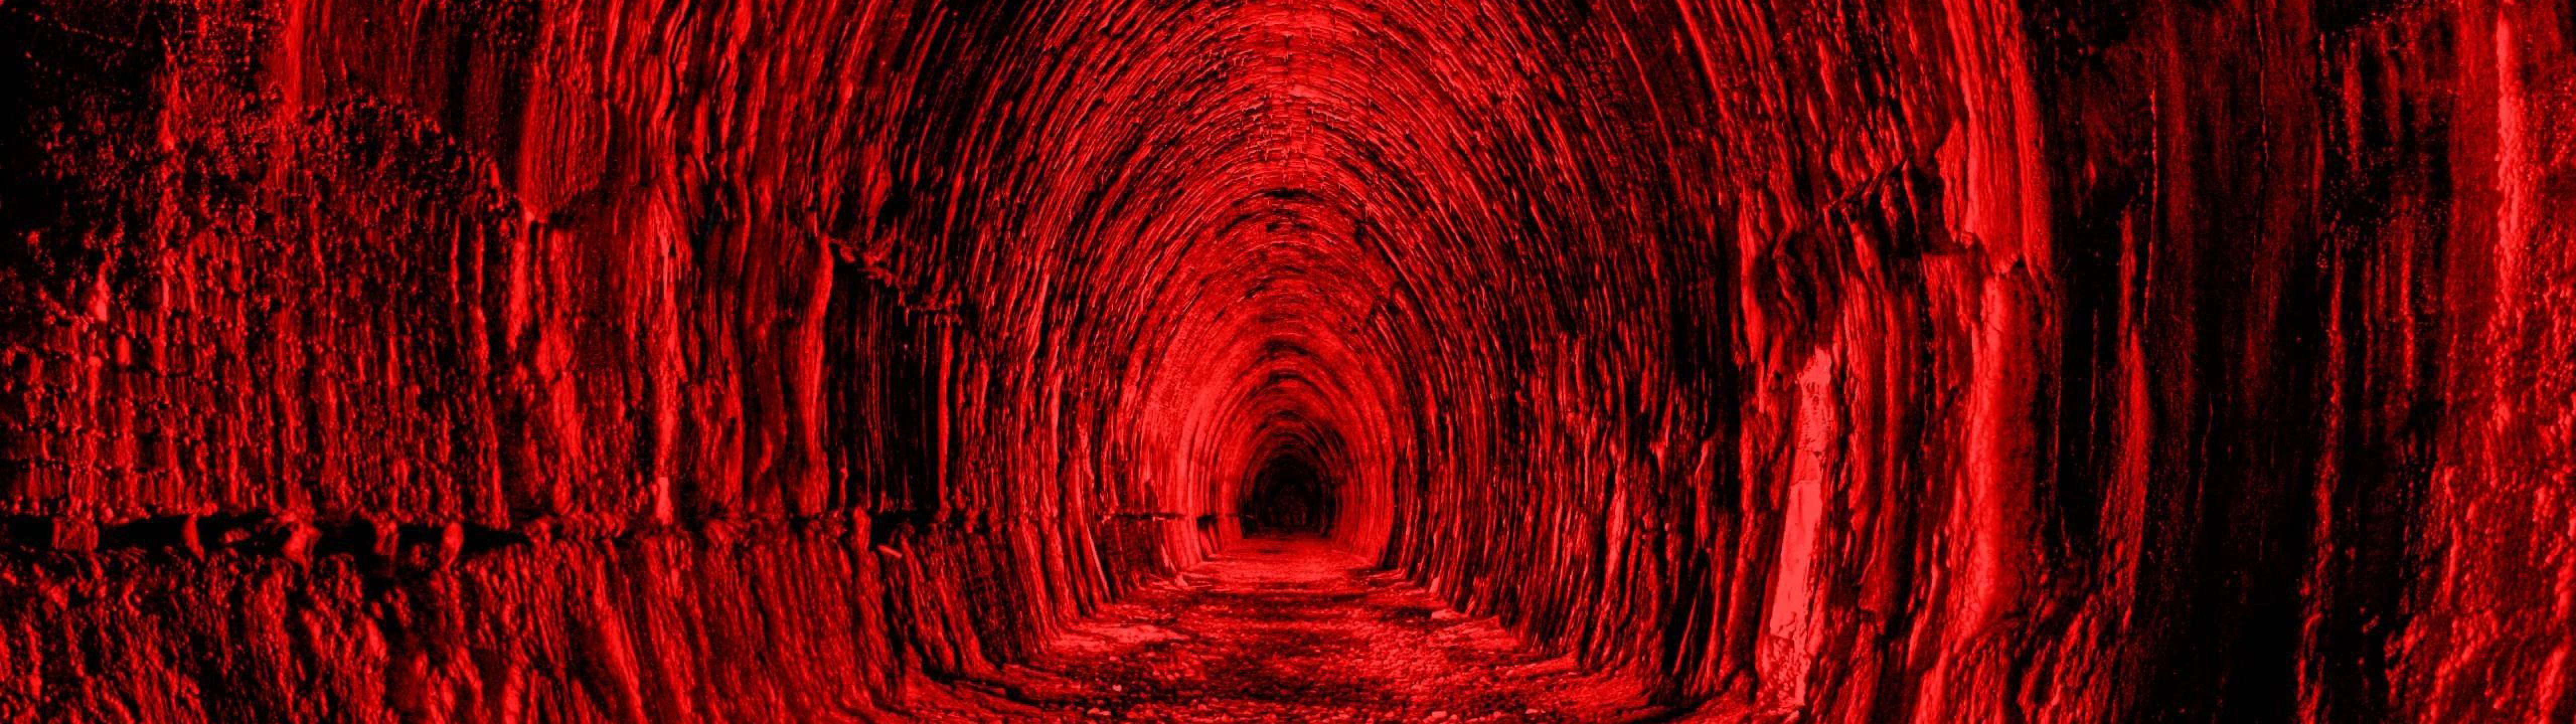 Red tunnel with a dark background - 5120x1440